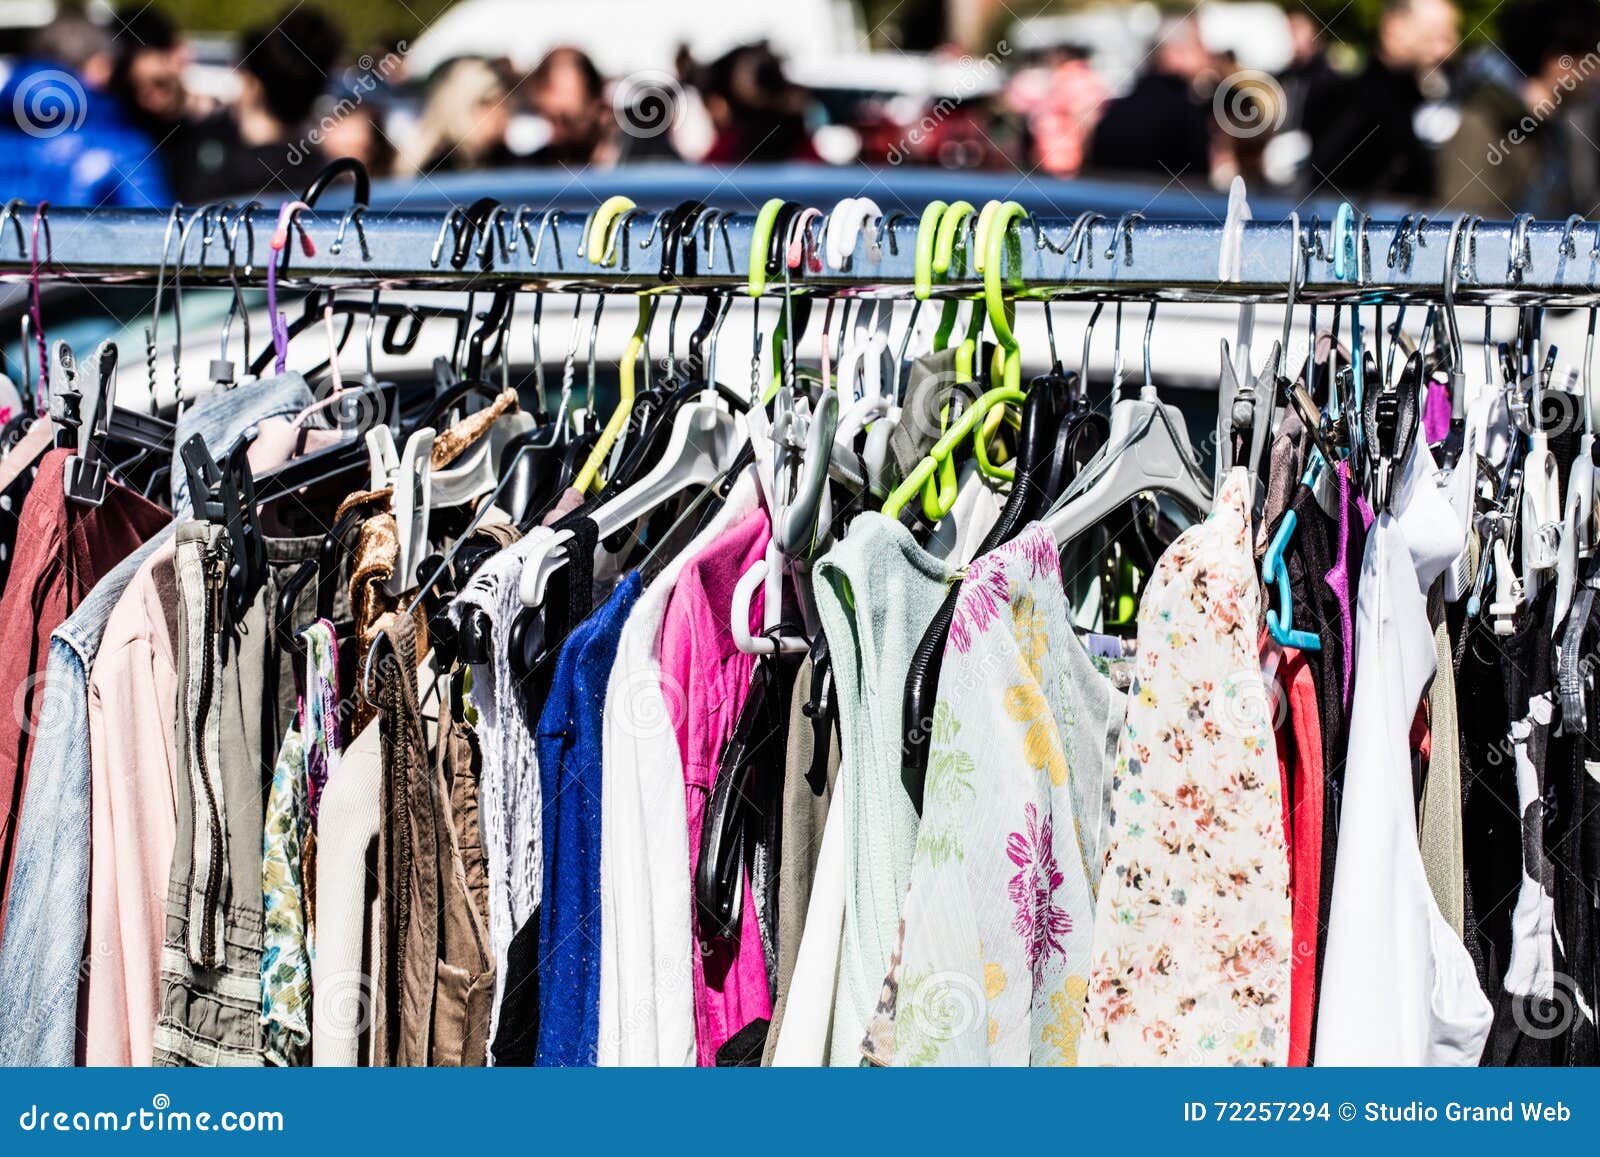 Second Hand Fashion Dresses on Display for Reselling or Recycling